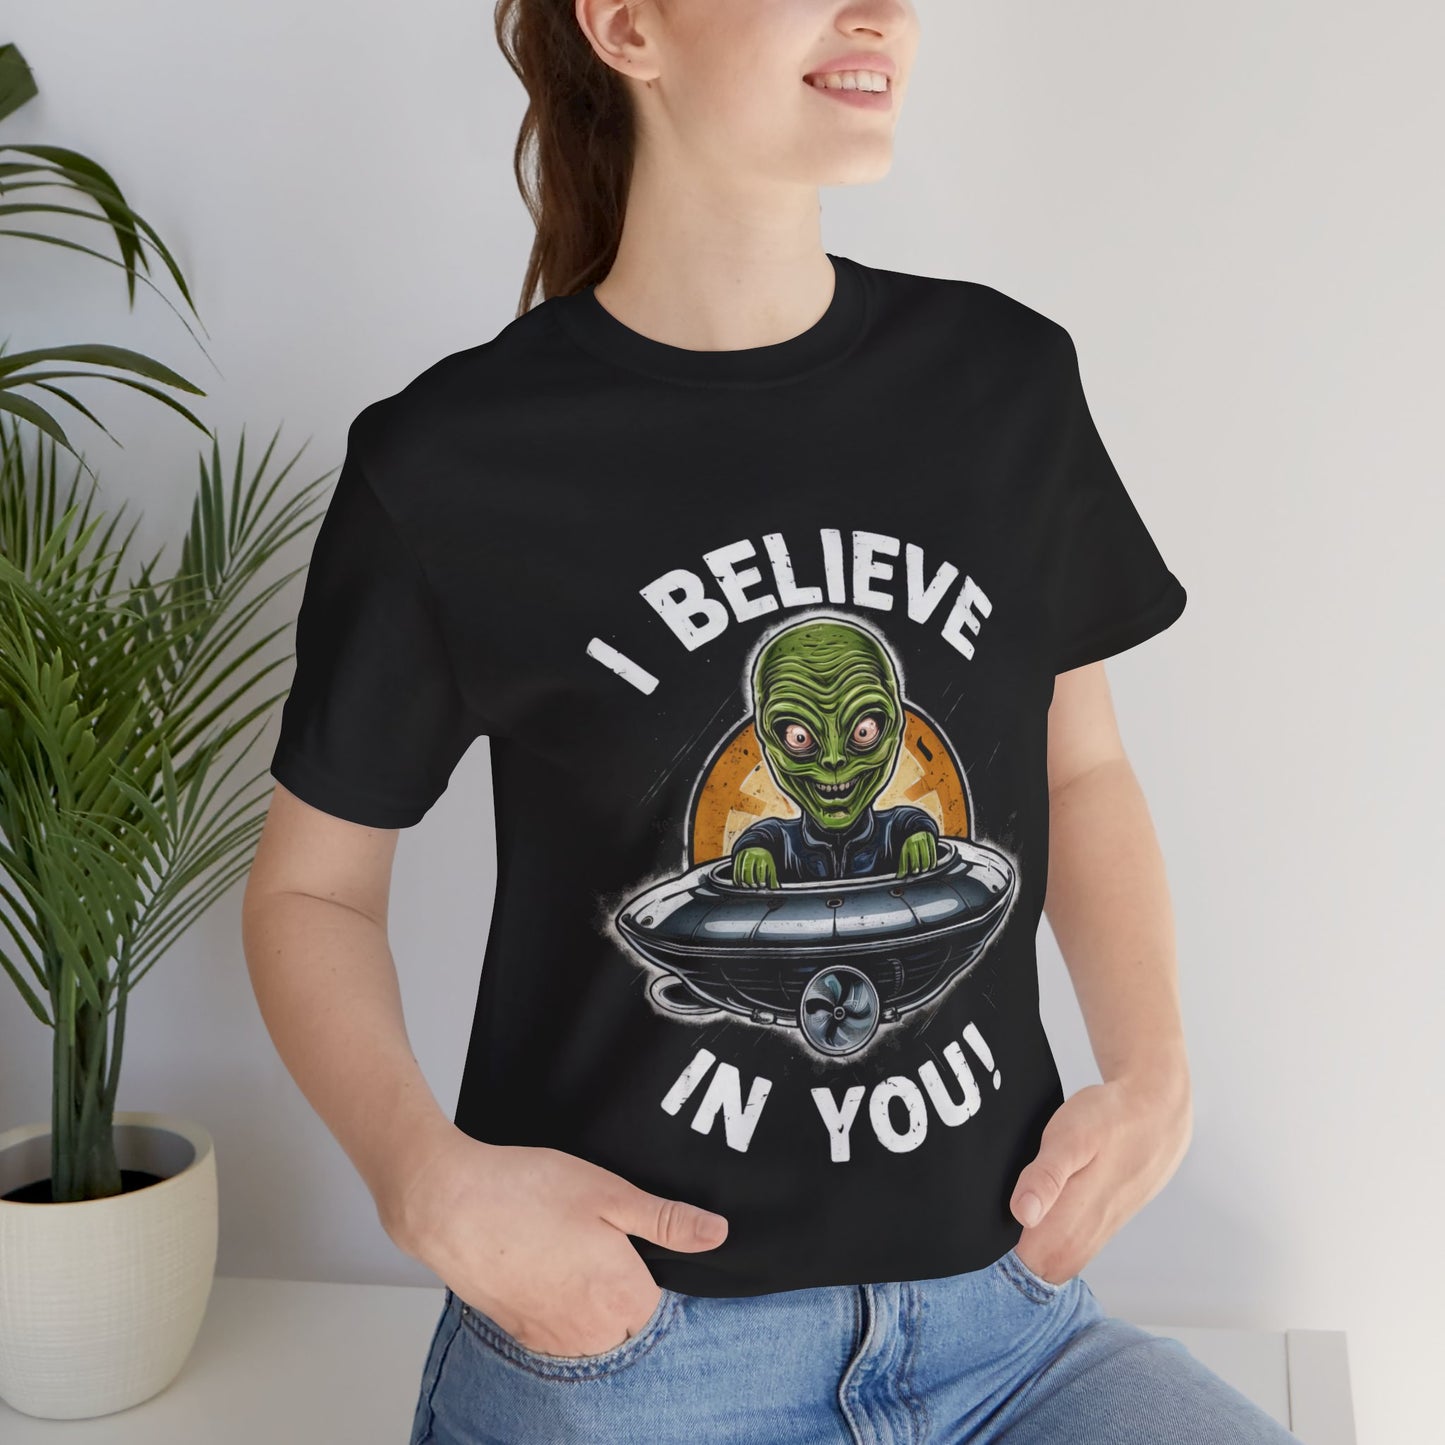 Alien - I Believe in You - T-Shirt by Stichas T-Shirt Company